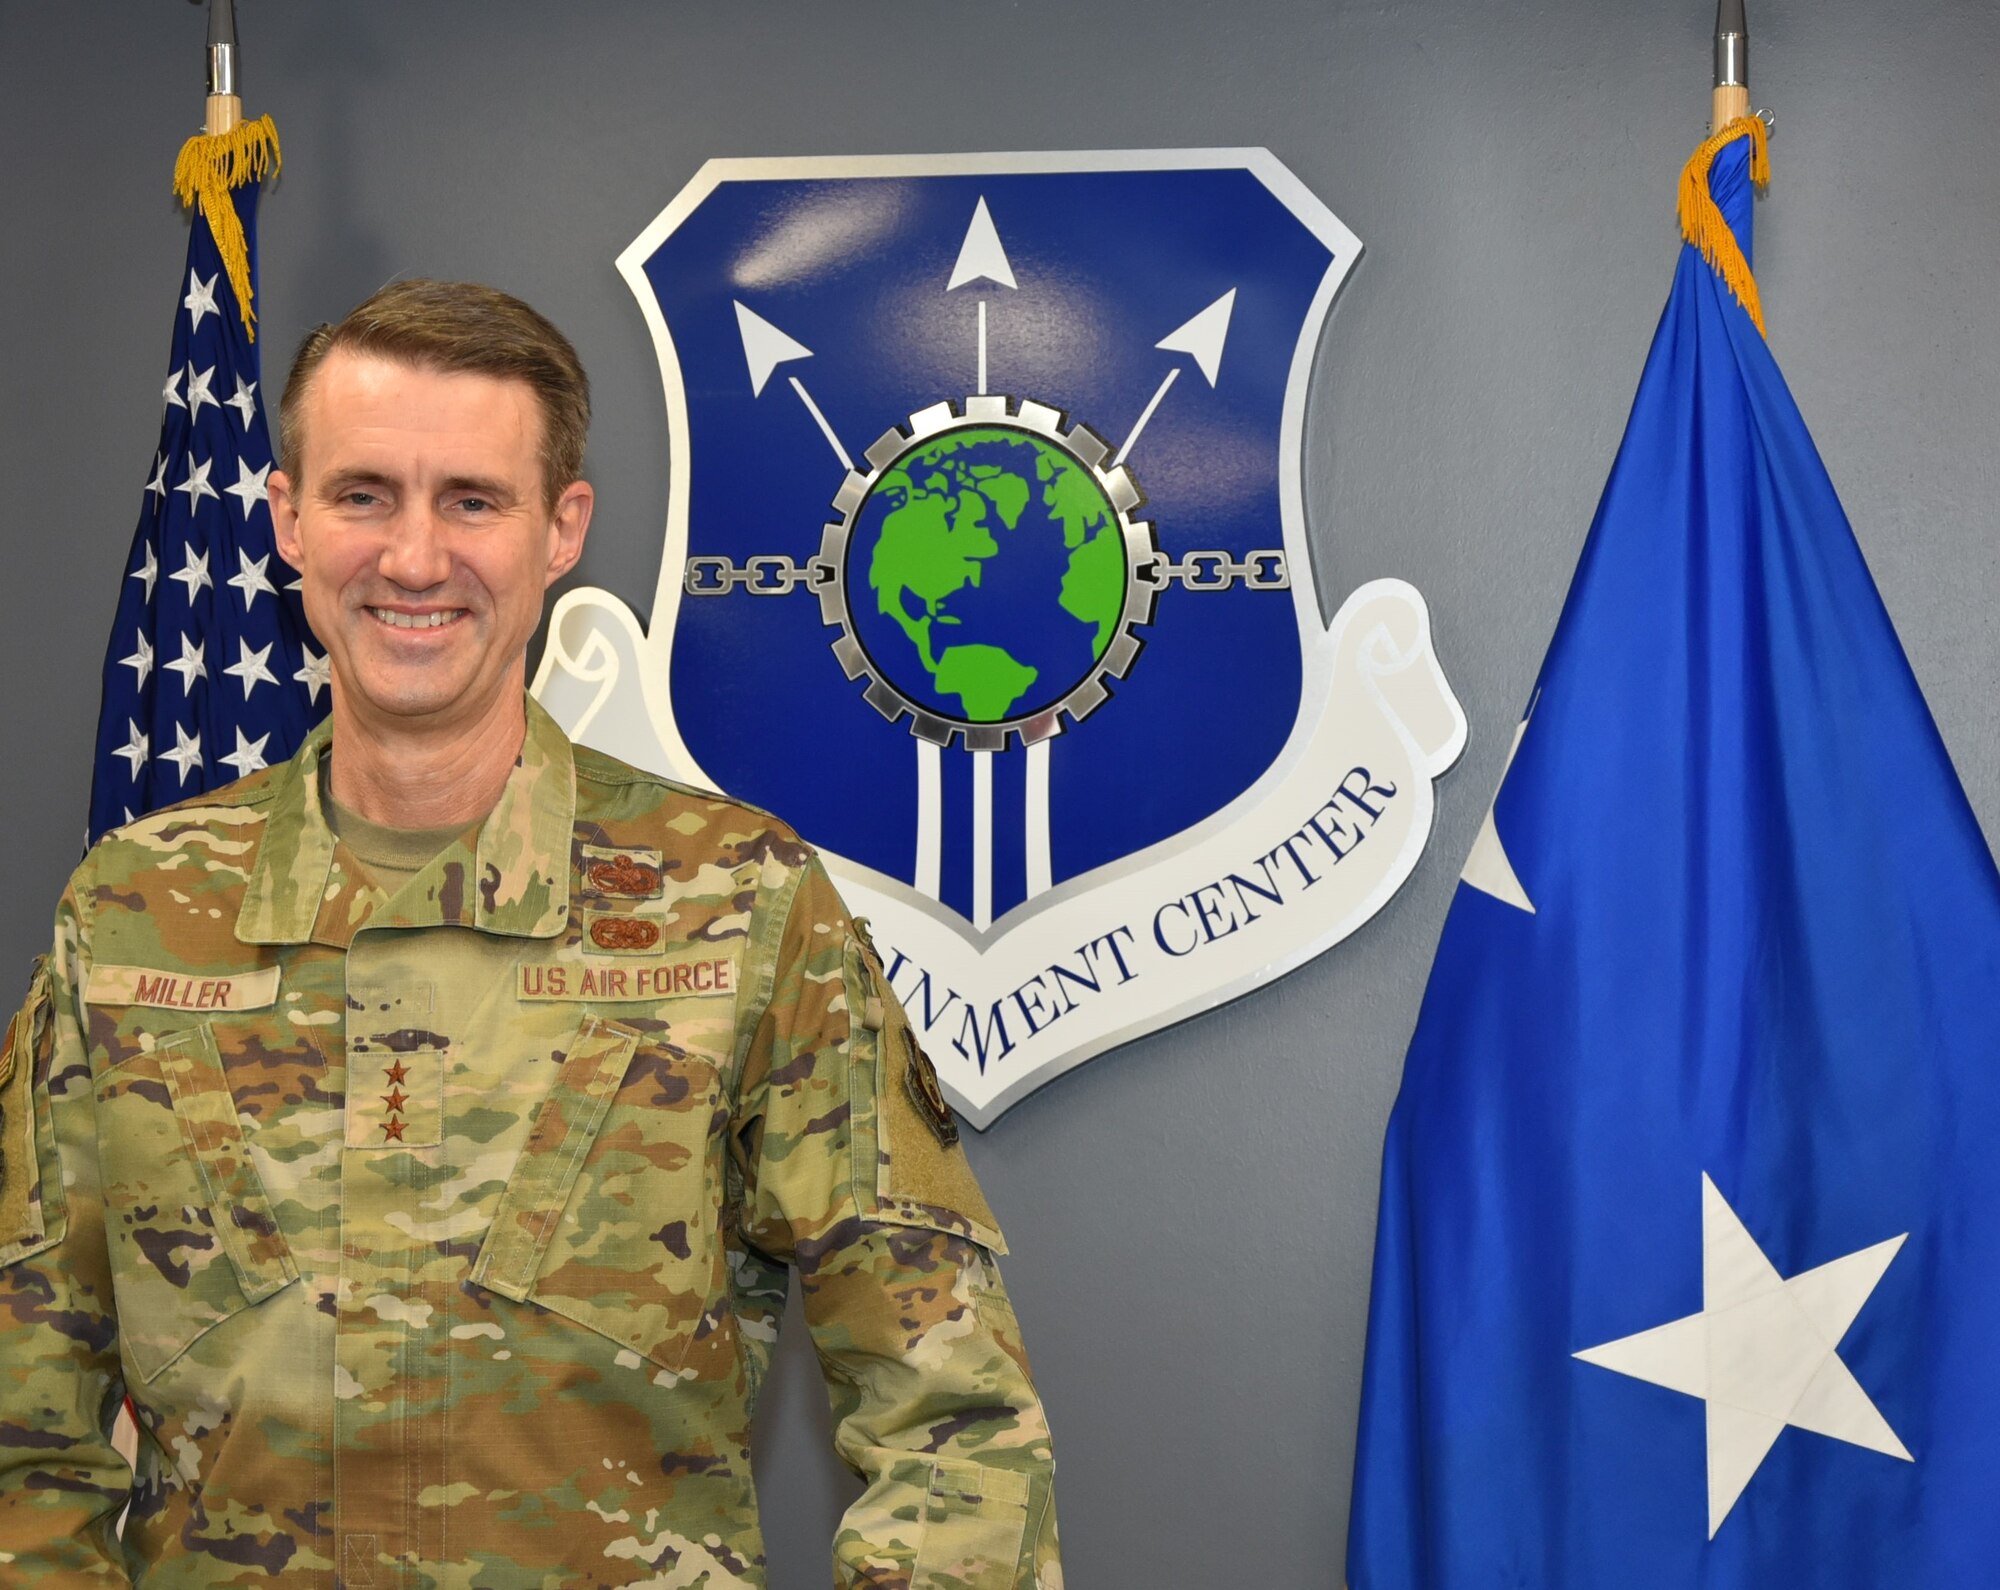 Lt. Gen. Tom Miller talks about his responsibility as commander of the AFSC and his plans for leading its nearly 40,000 Airmen who focus on mission readiness.